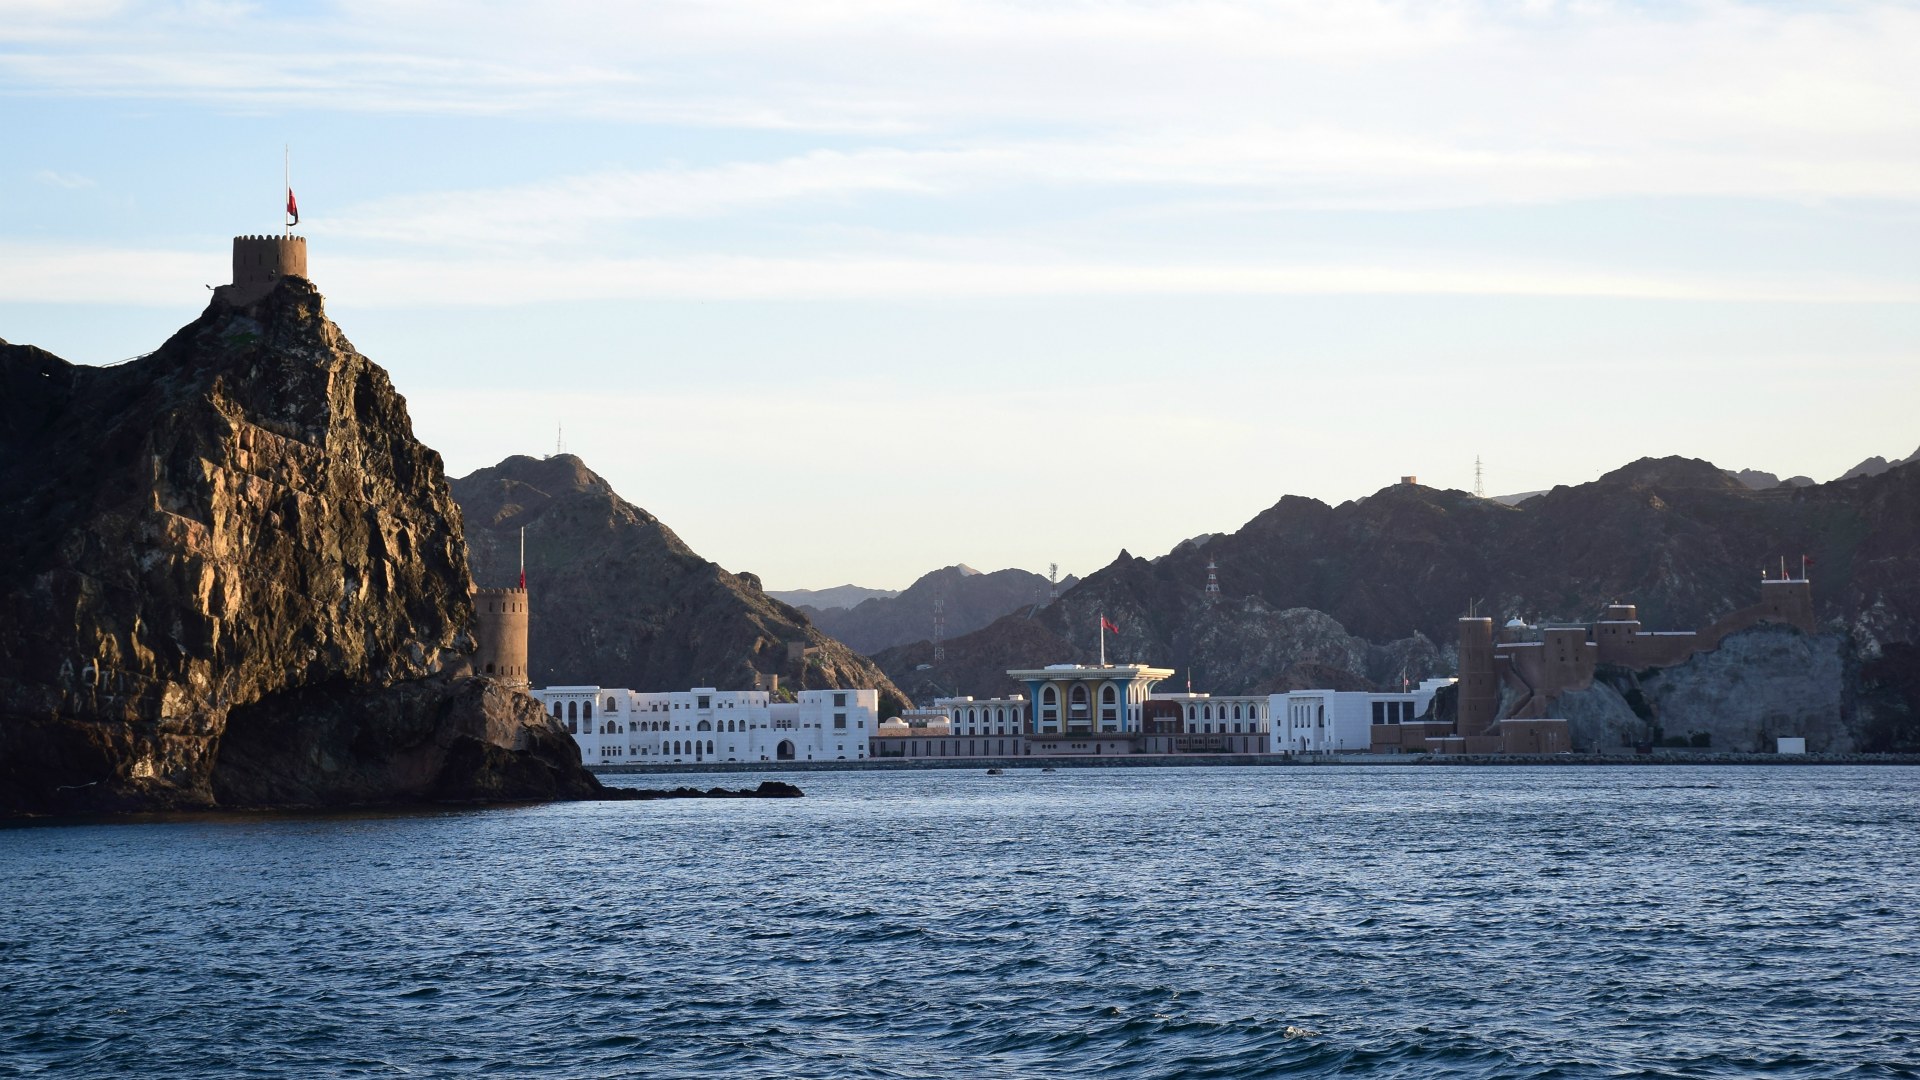 View towards Sultan's Palace, Muscat